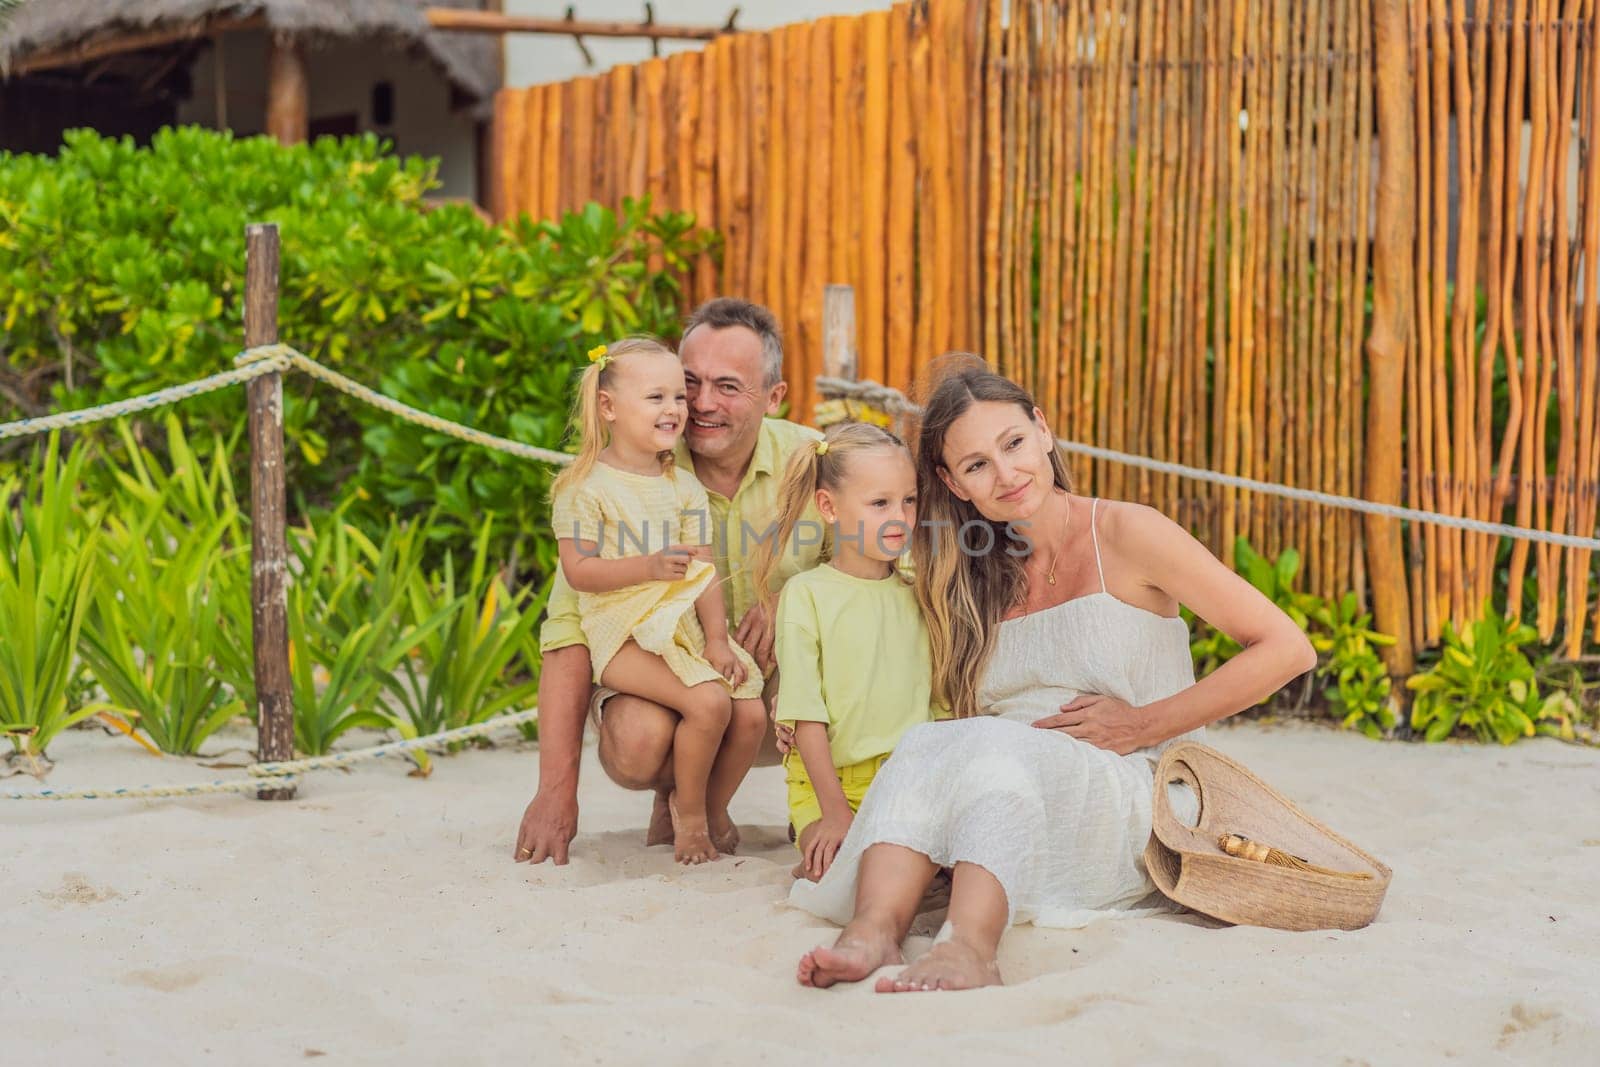 A joyful family, two girls, dad, and a pregnant mom, bask in tropical beach bliss, celebrating a radiant pregnancy amidst paradise by galitskaya